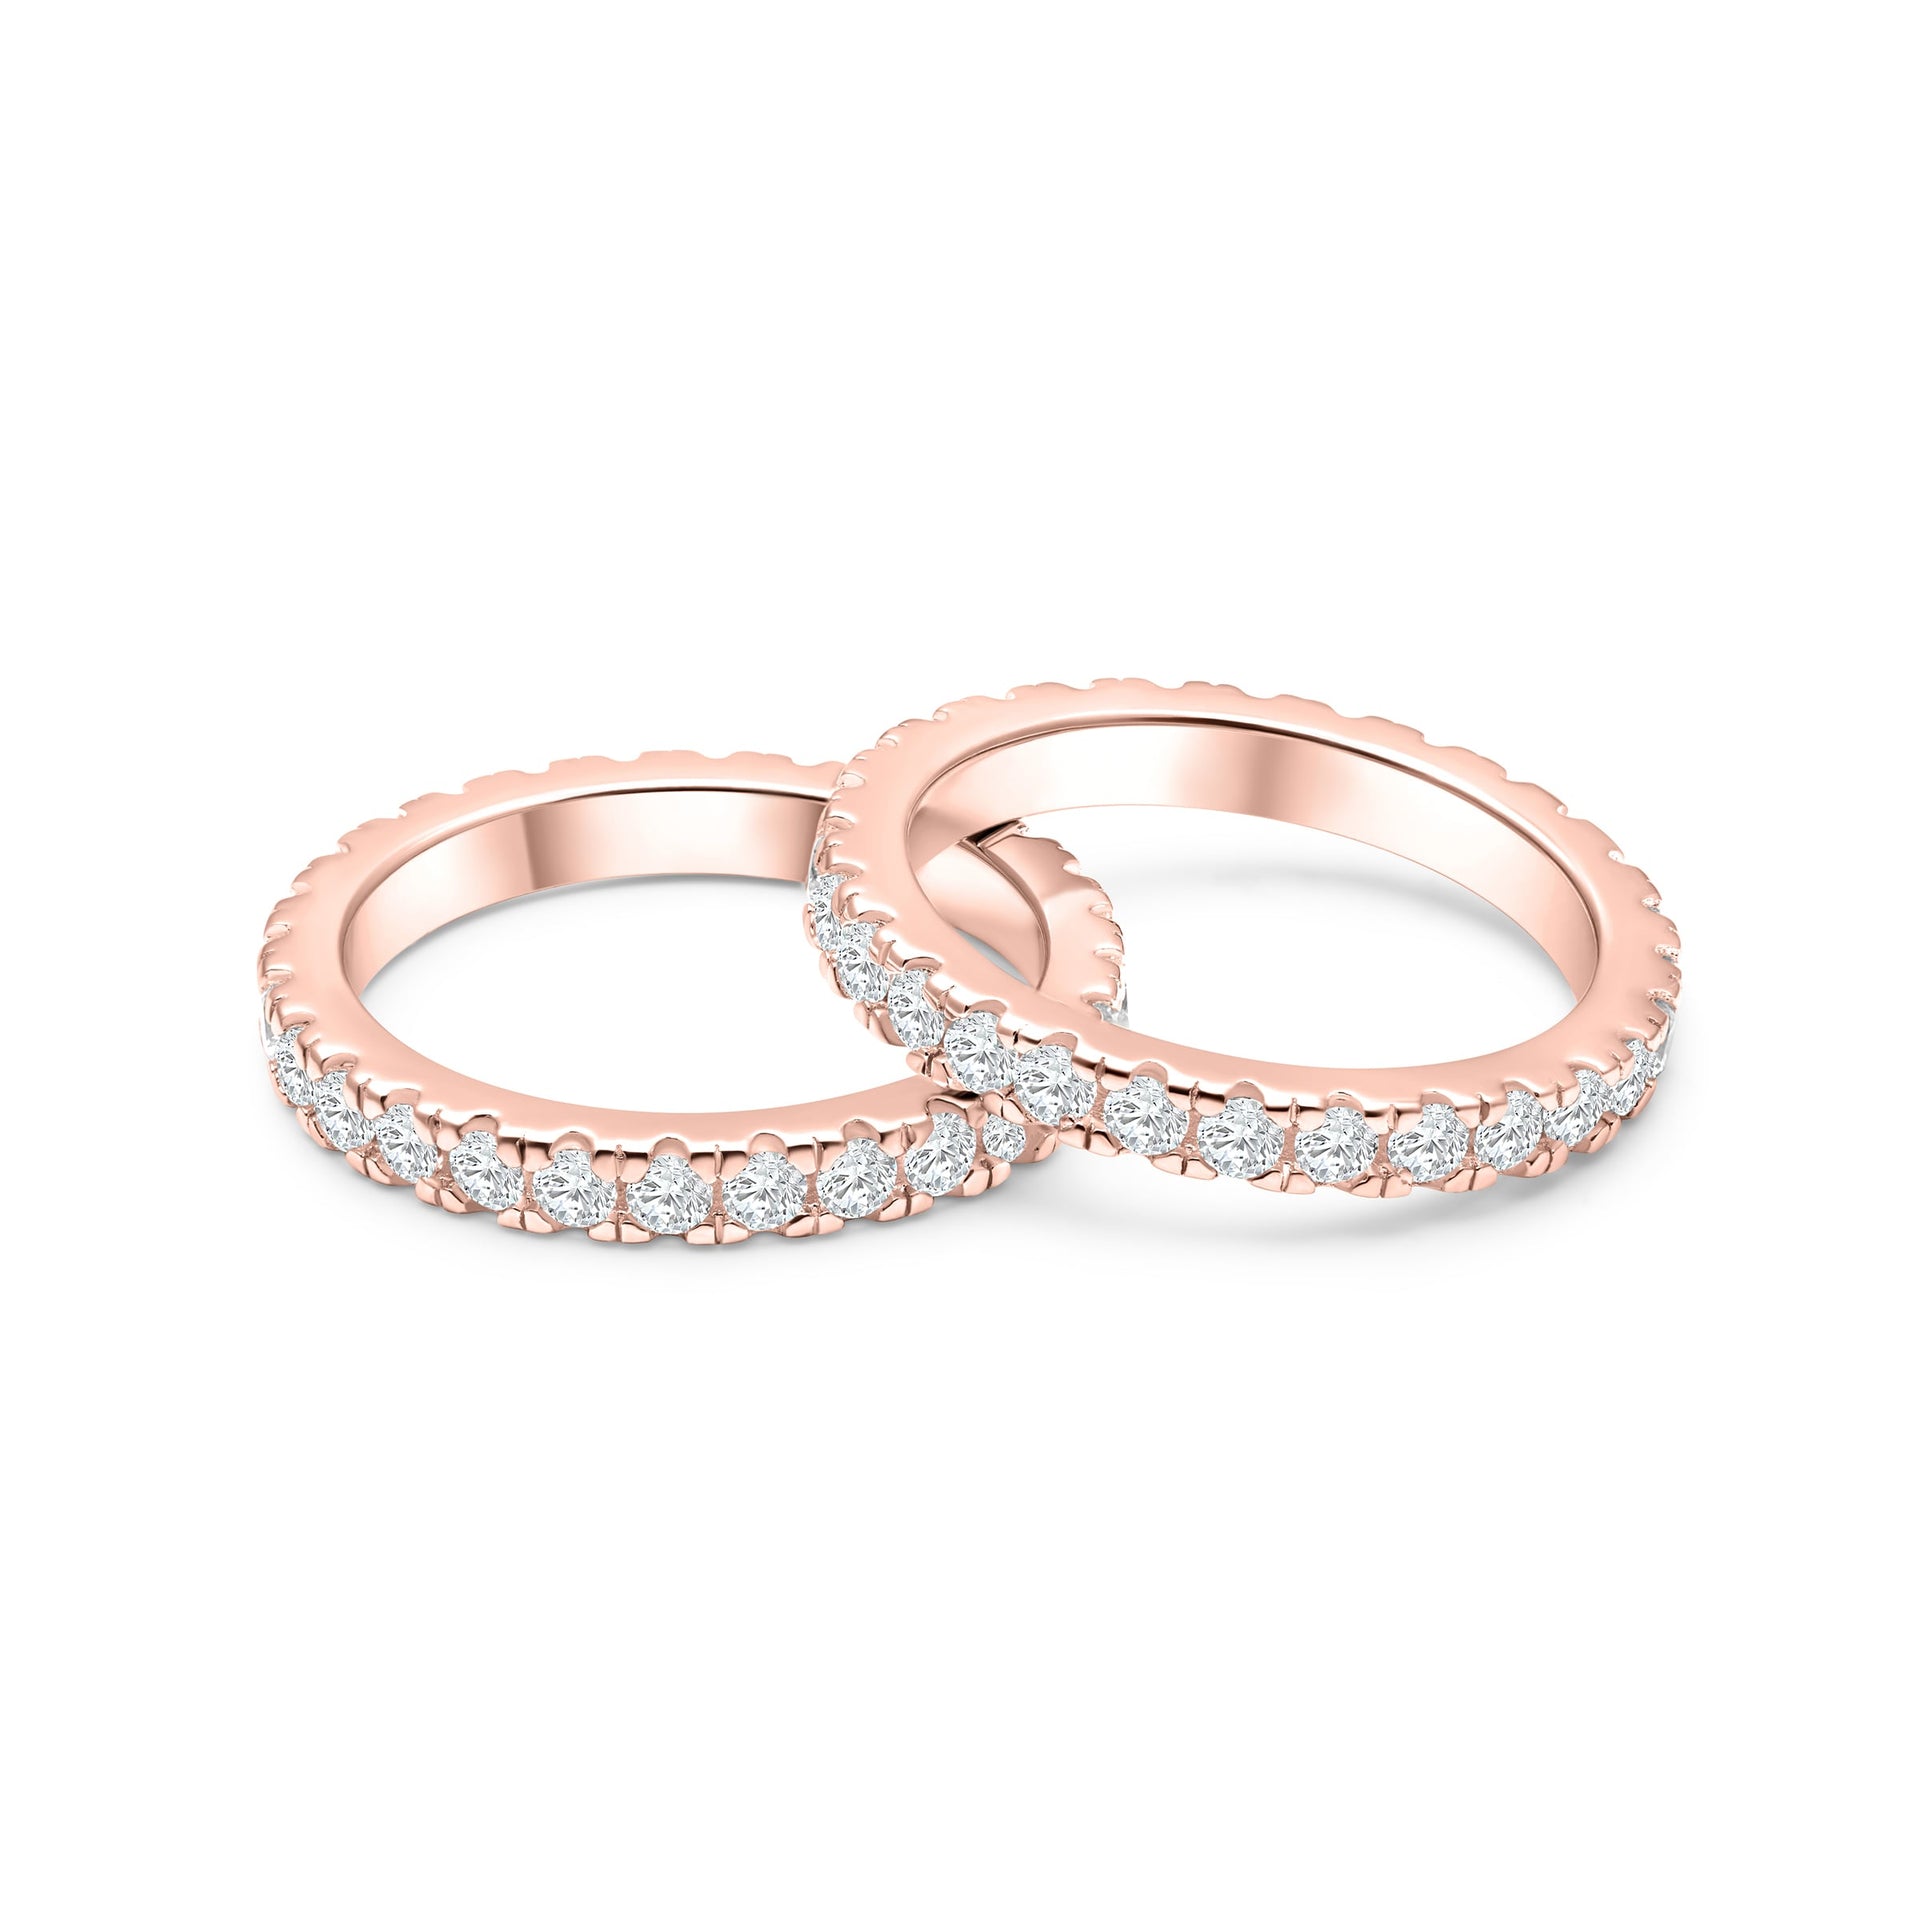 top view of rose gold eternity wedding band set, with one band leaning slightly on the other